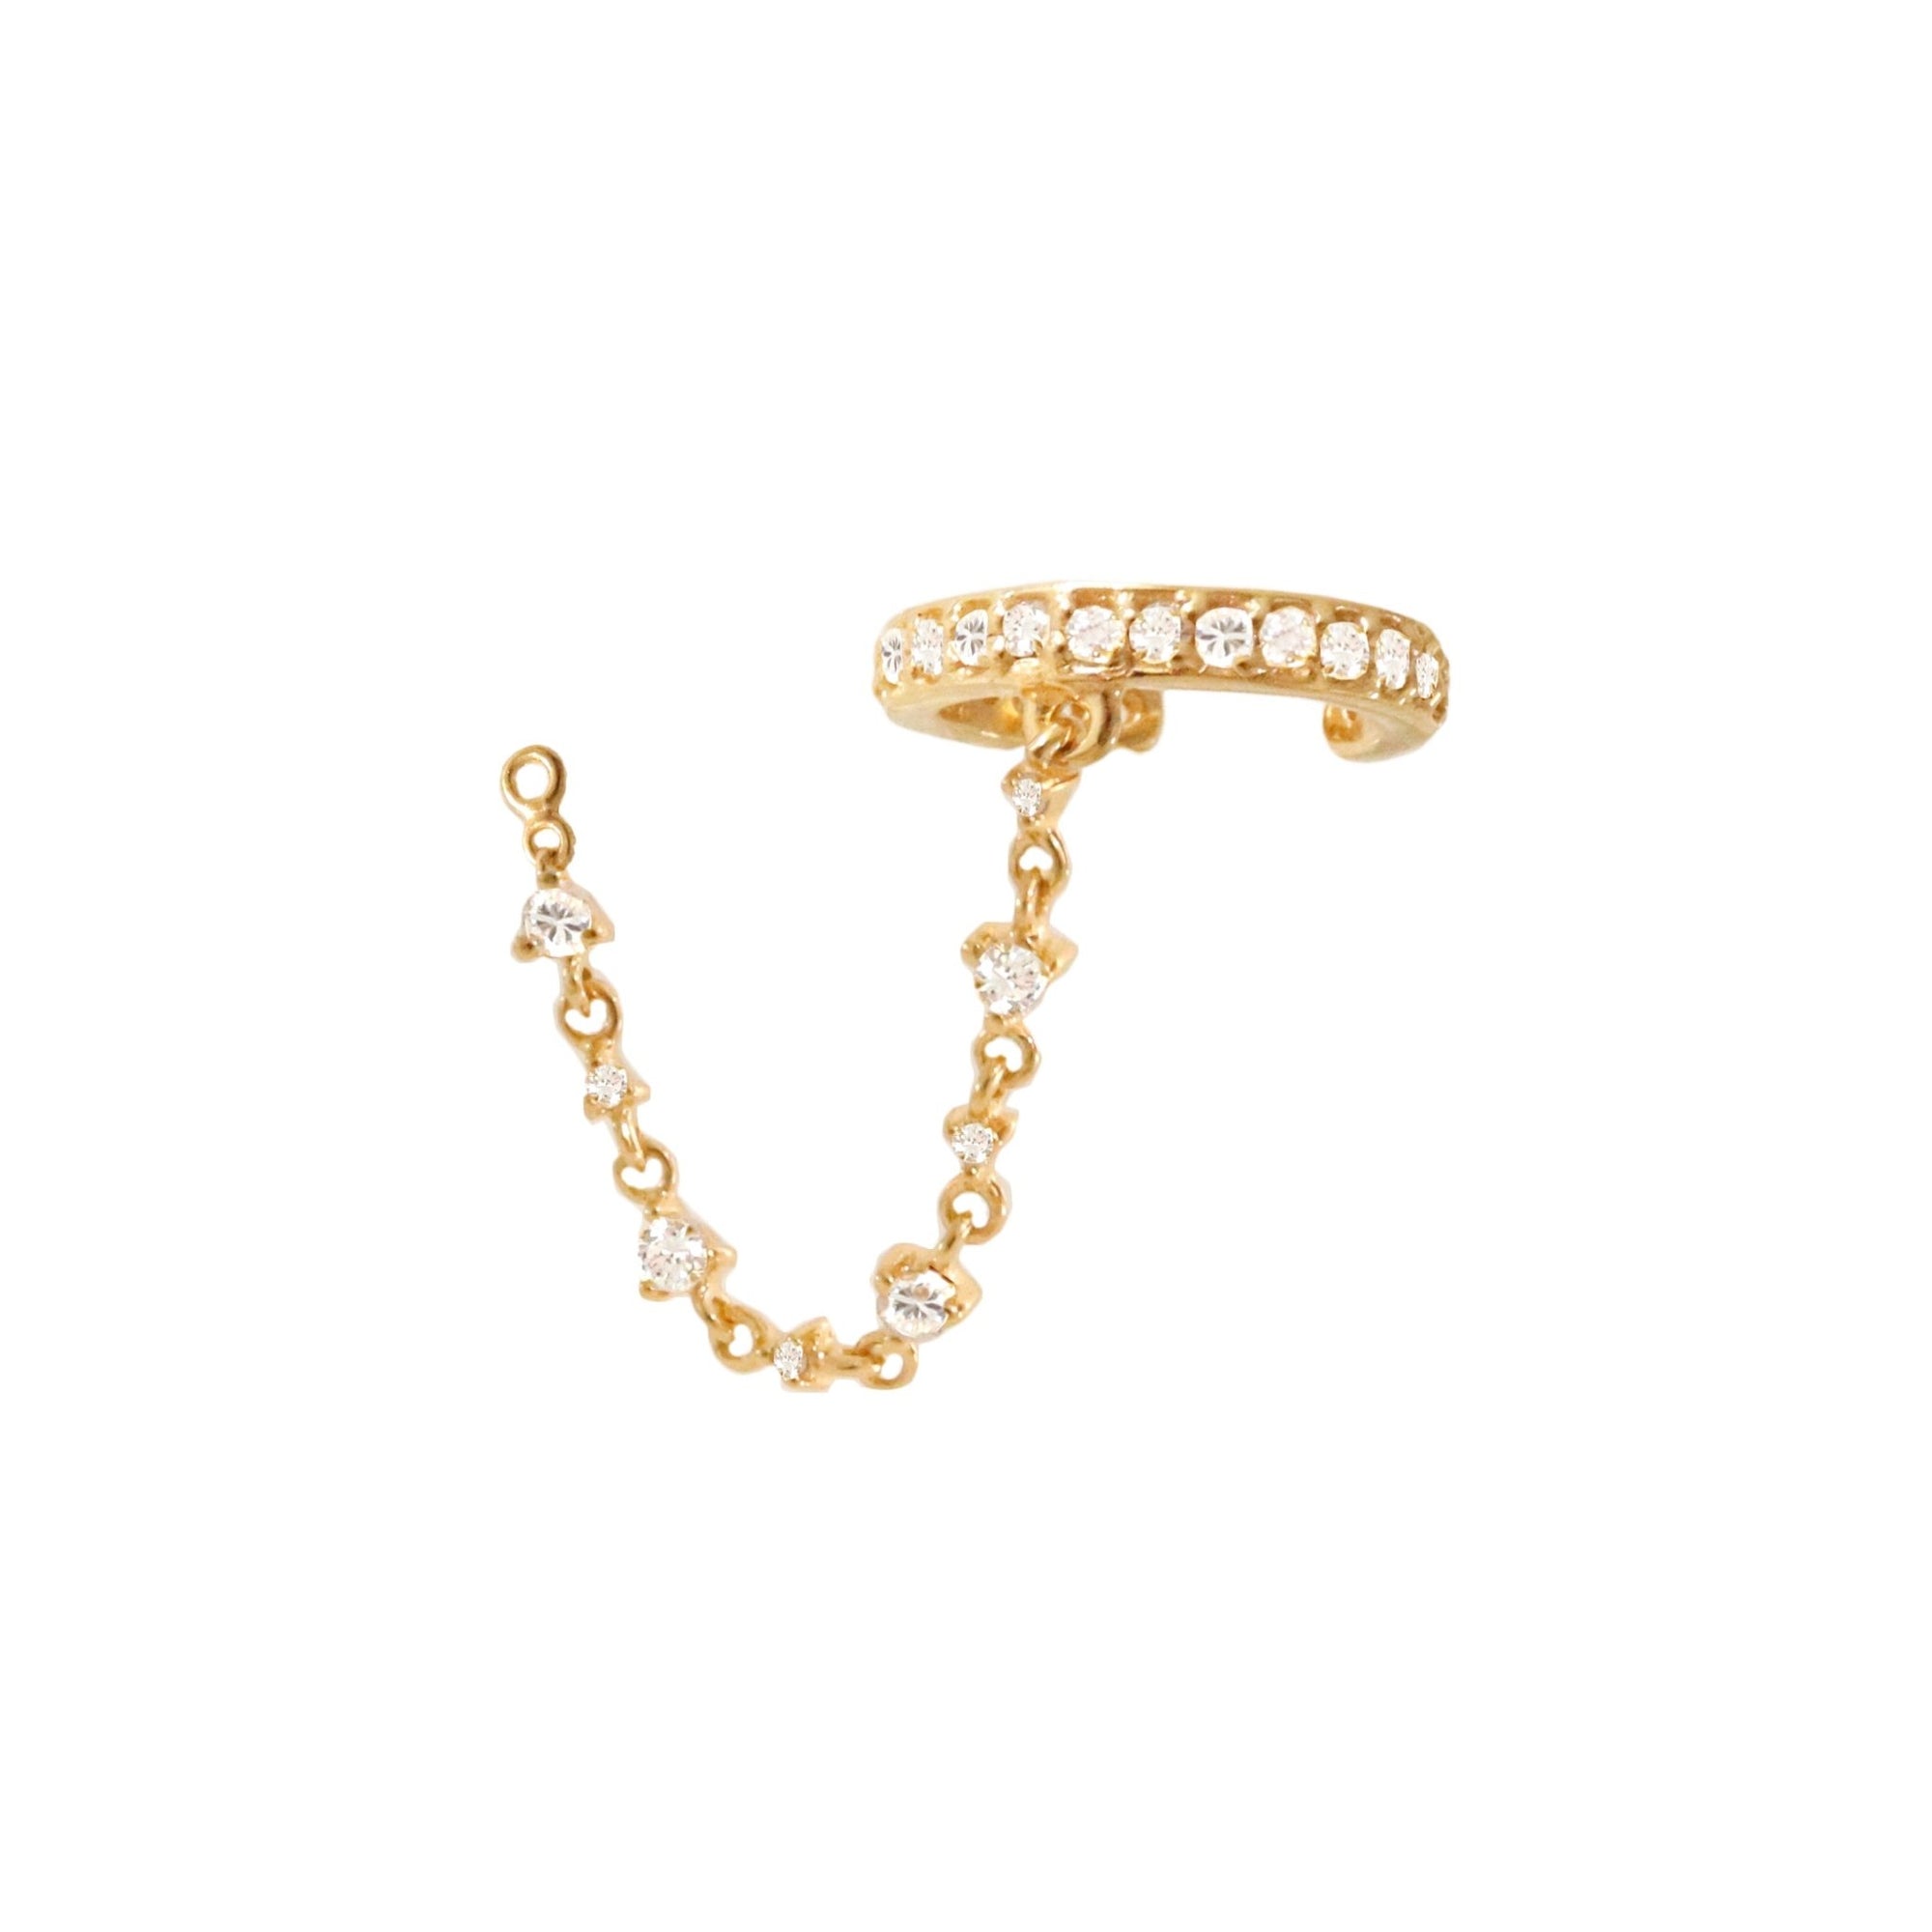 SCATTERED LOVE CHAIN EAR CUFF - CUBIC ZIRCONIA & GOLD - SO PRETTY CARA COTTER